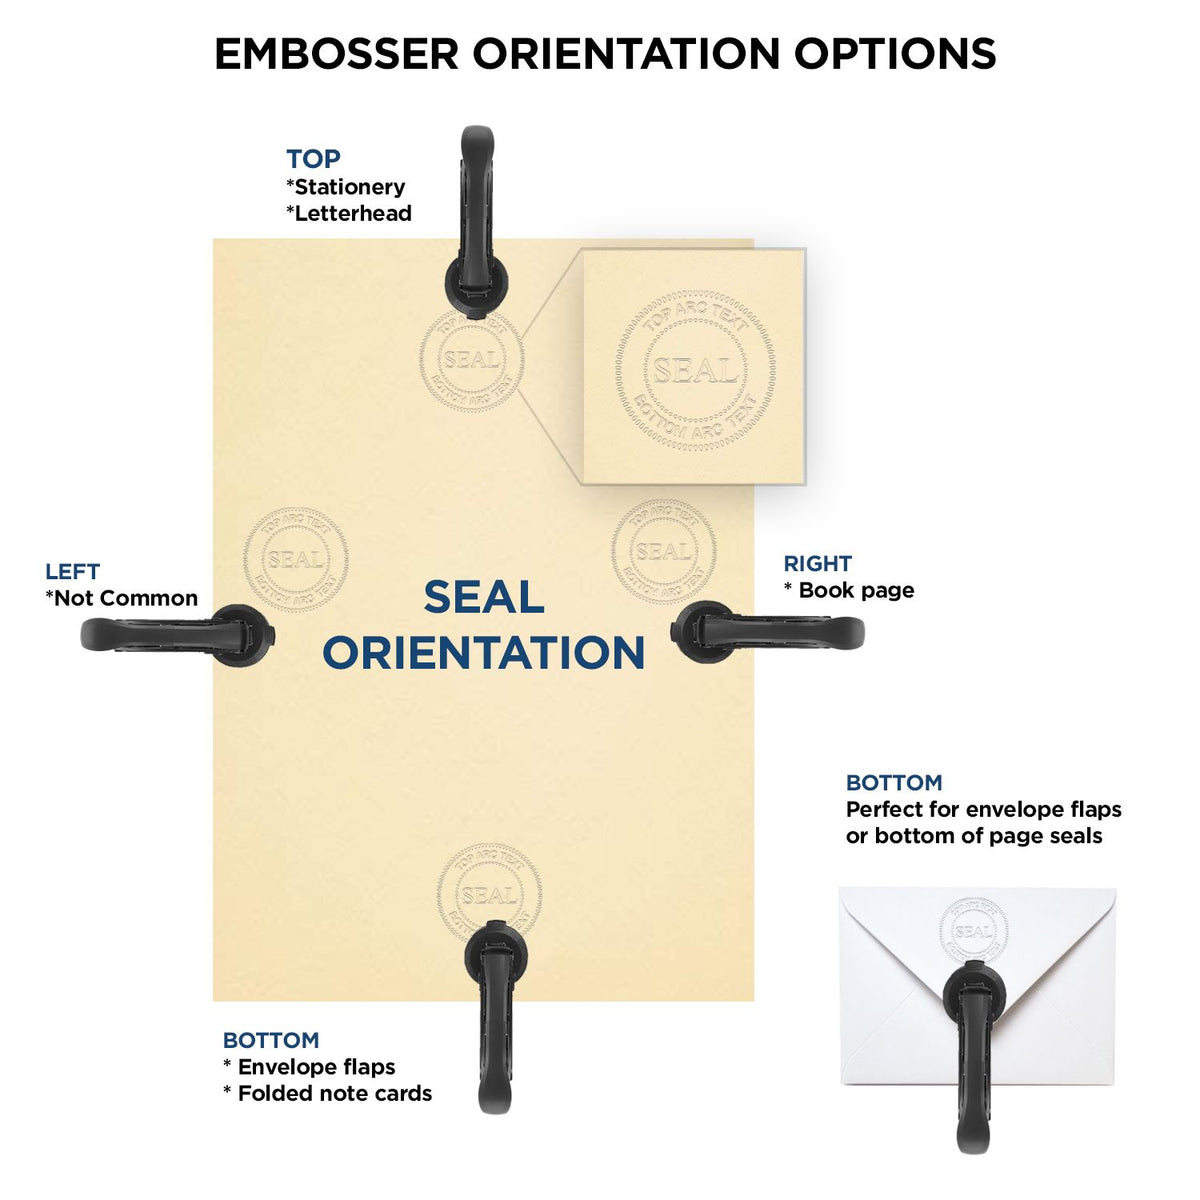 An infographic for the Long Reach Alabama PE Seal showing embosser orientation, this is showing examples of a top, bottom, right and left insert.